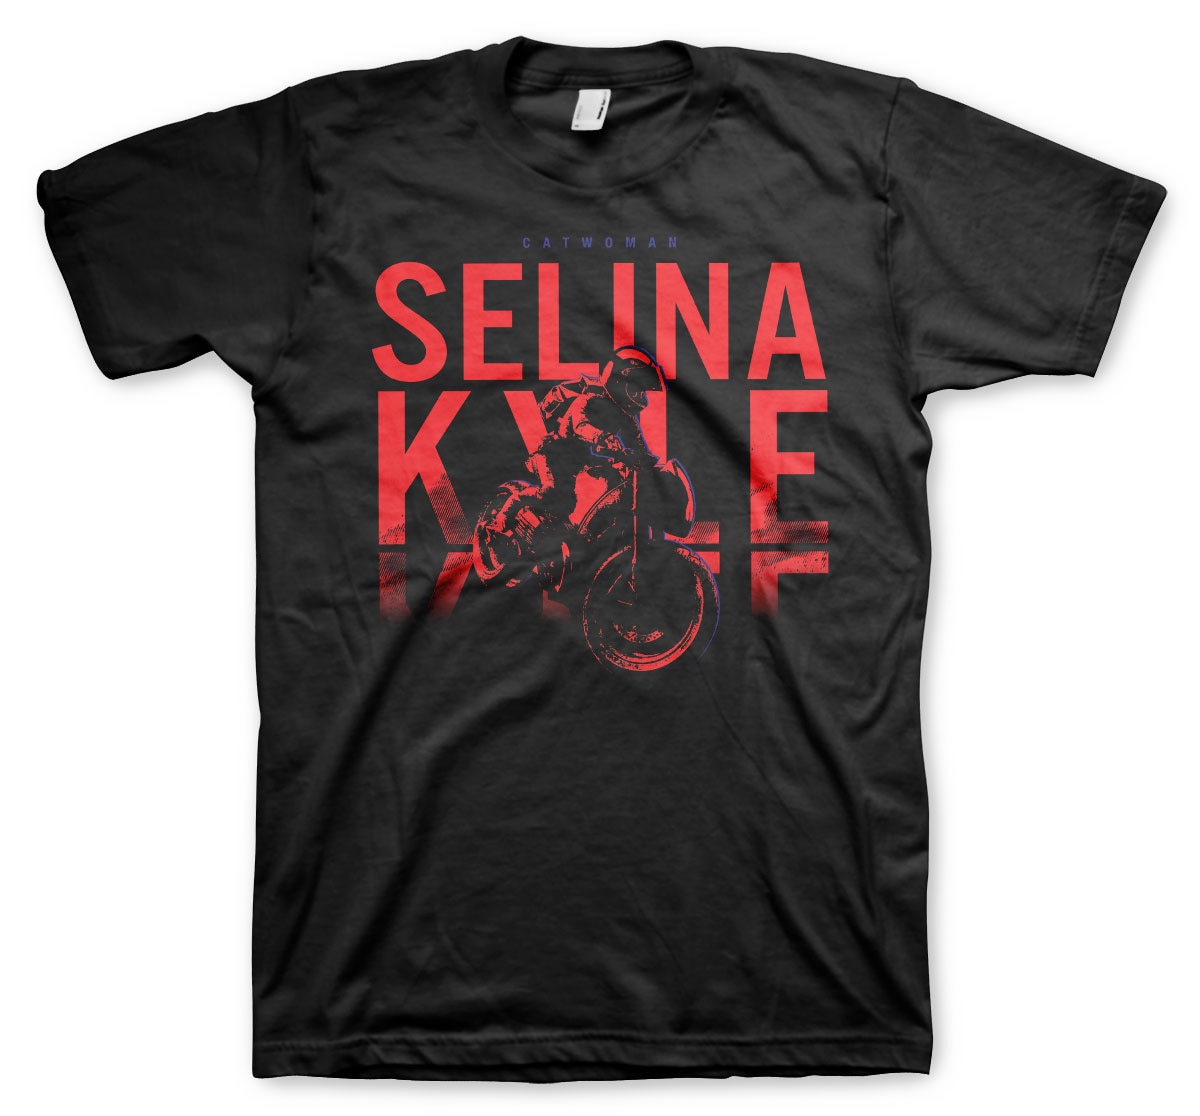 Selina Kyle is Catwoman T-Shirt